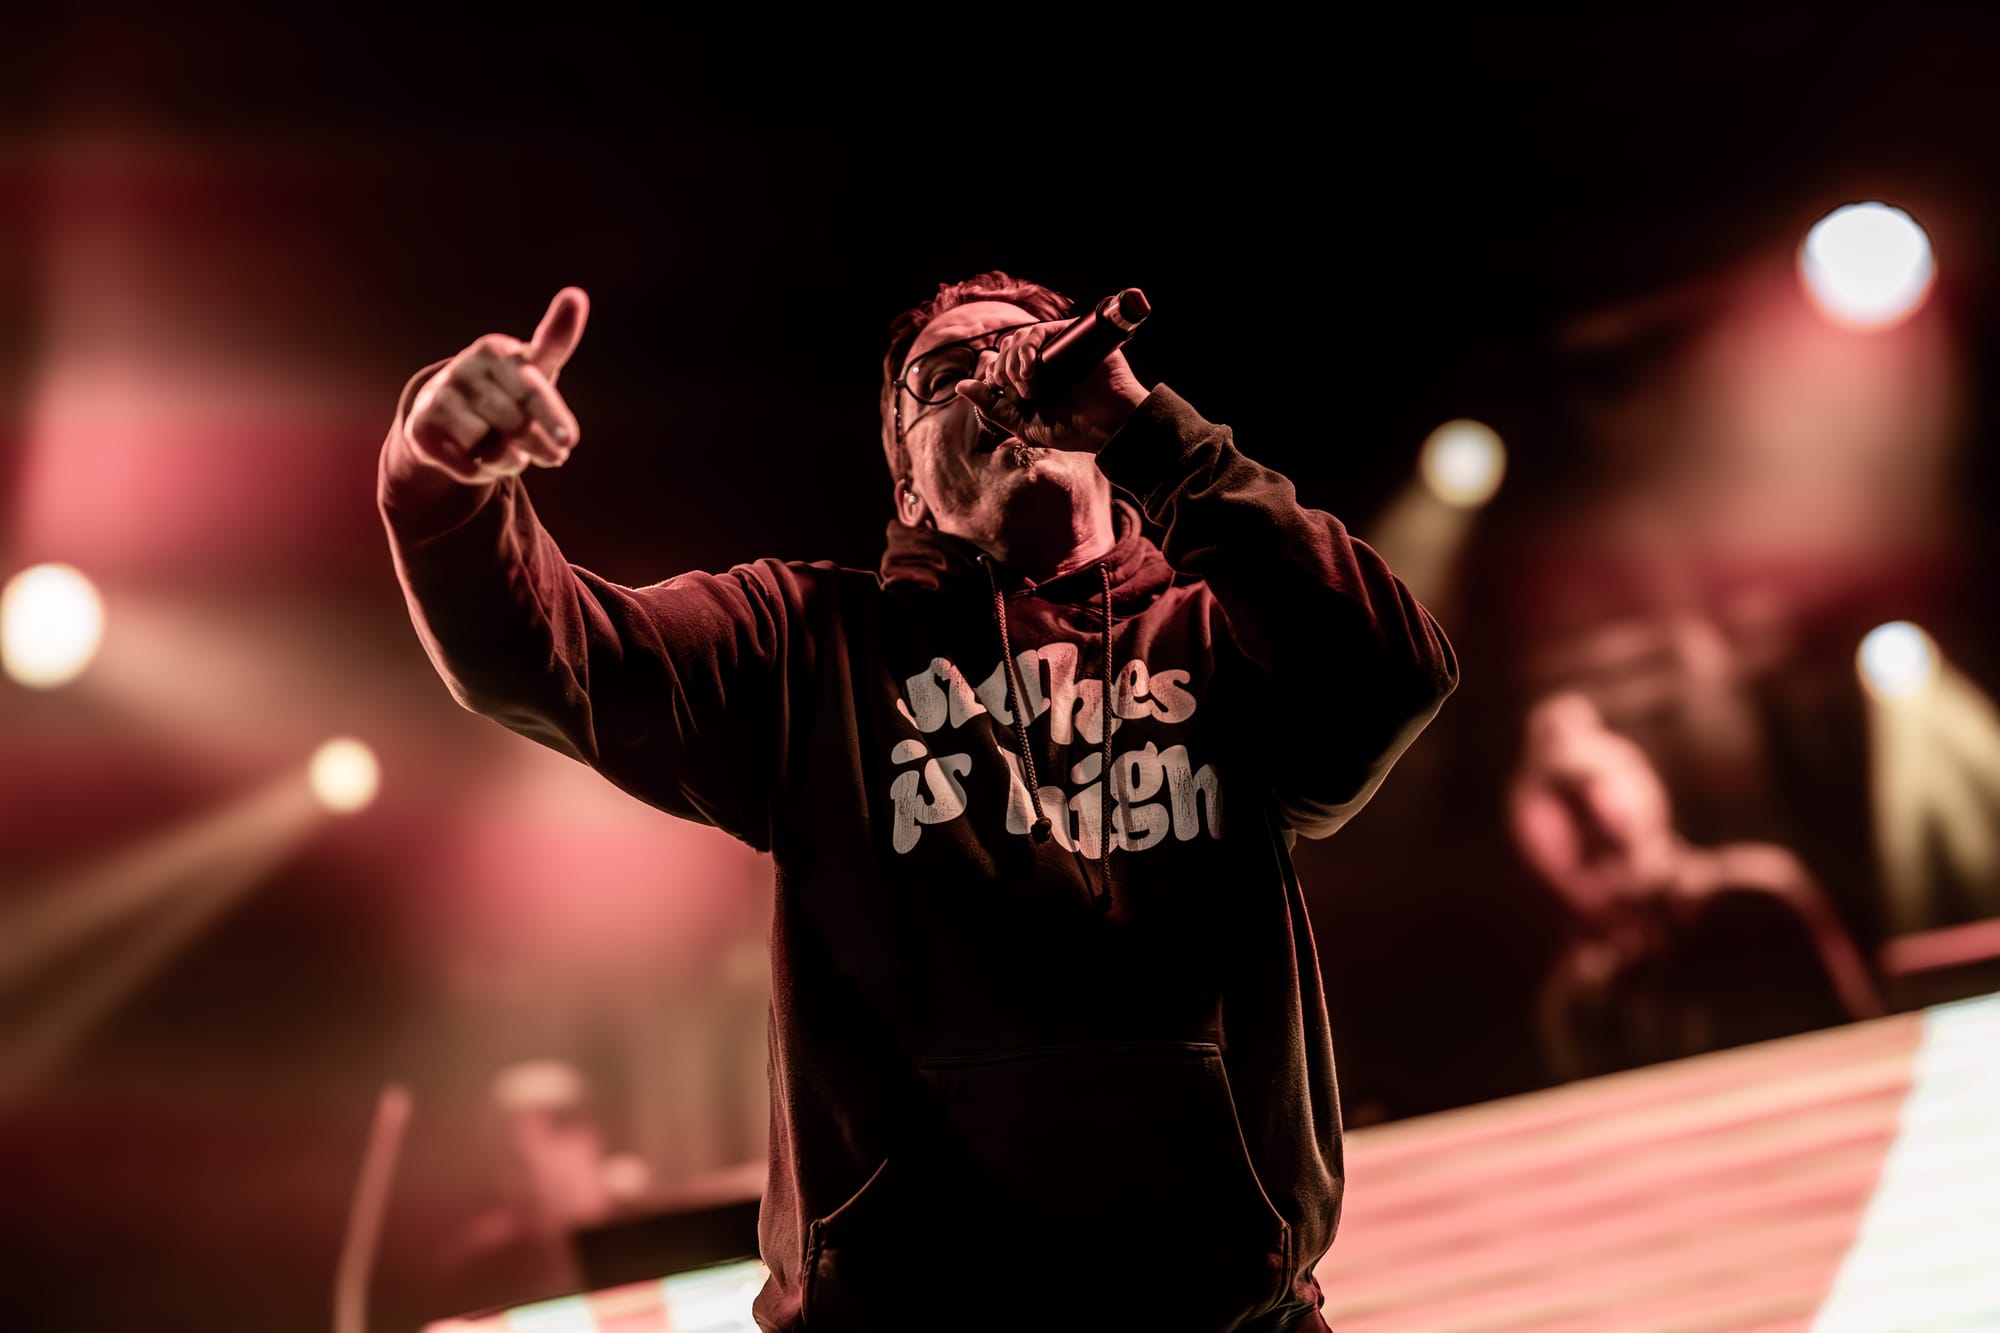 Atmosphere live at the Vinyl Music Hall 4/13 (photo by Moth)